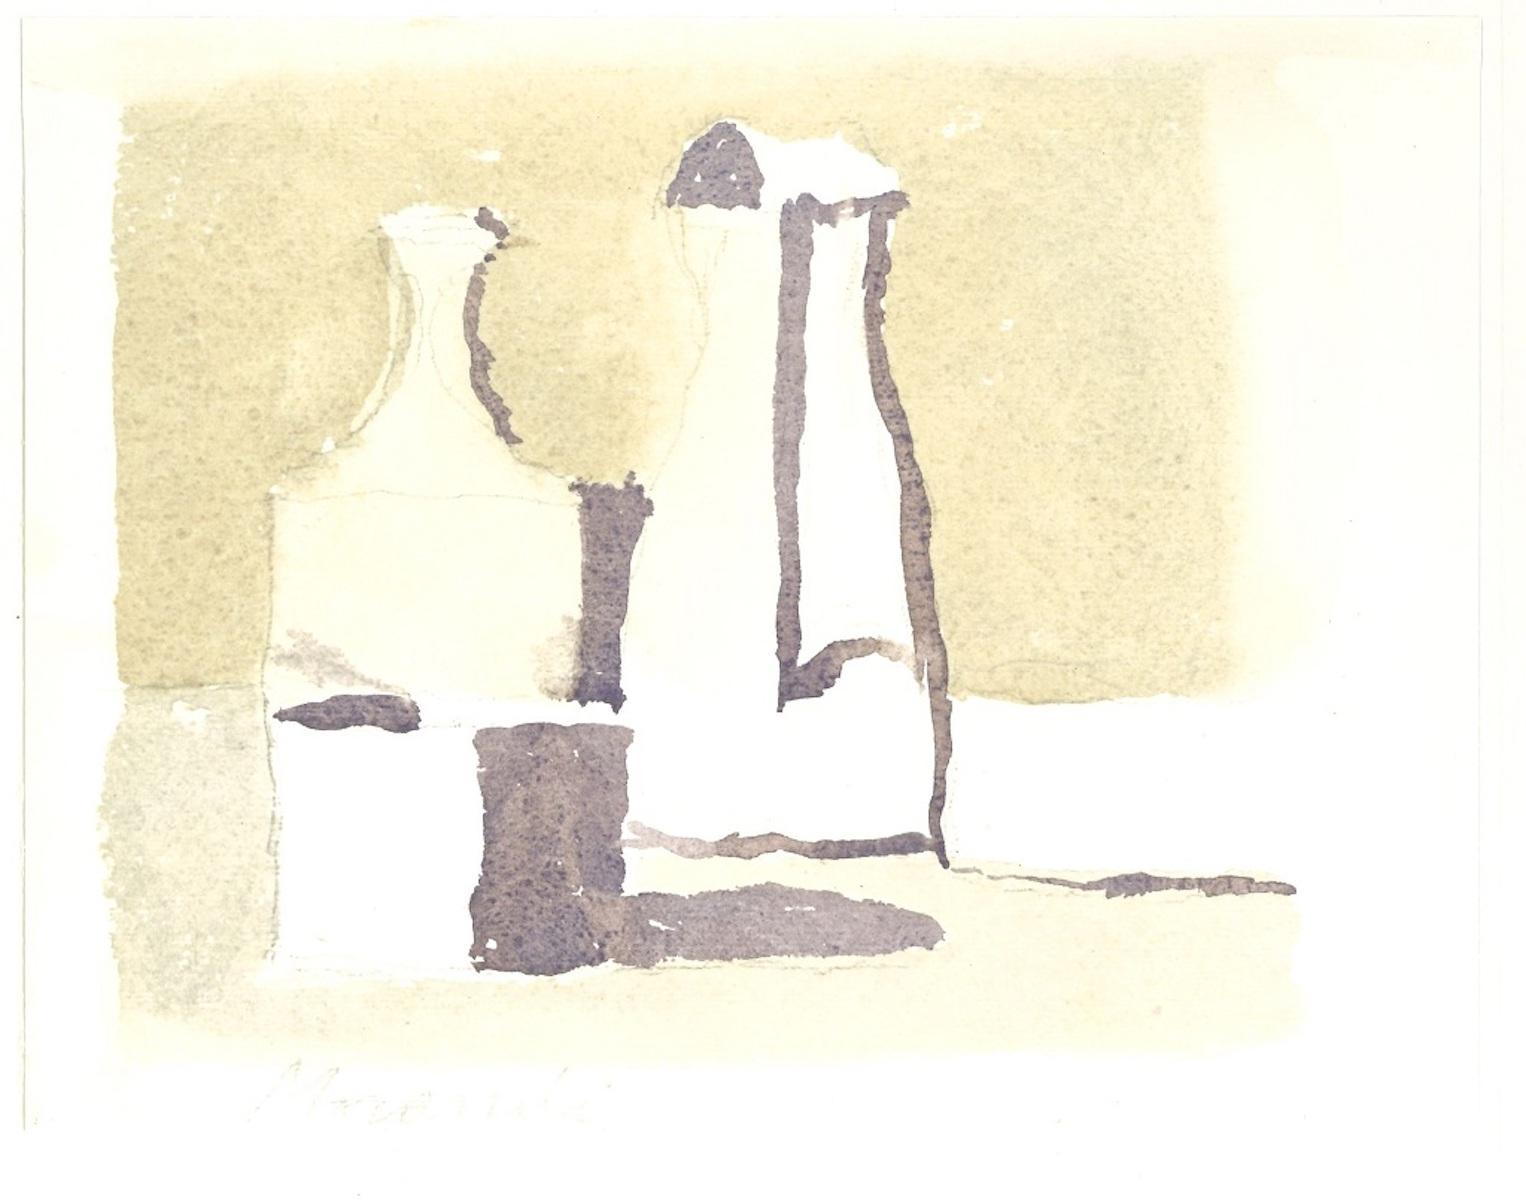 Image dimensions: 16 x 21  cm.

Still Life is a superb original offset print, reproducing the original watercolor by Giorgio Morandi.

Signature in pencil by the artist is perfectly reproduced on plate.

From the volume "L'Opera grafica di Giorgio